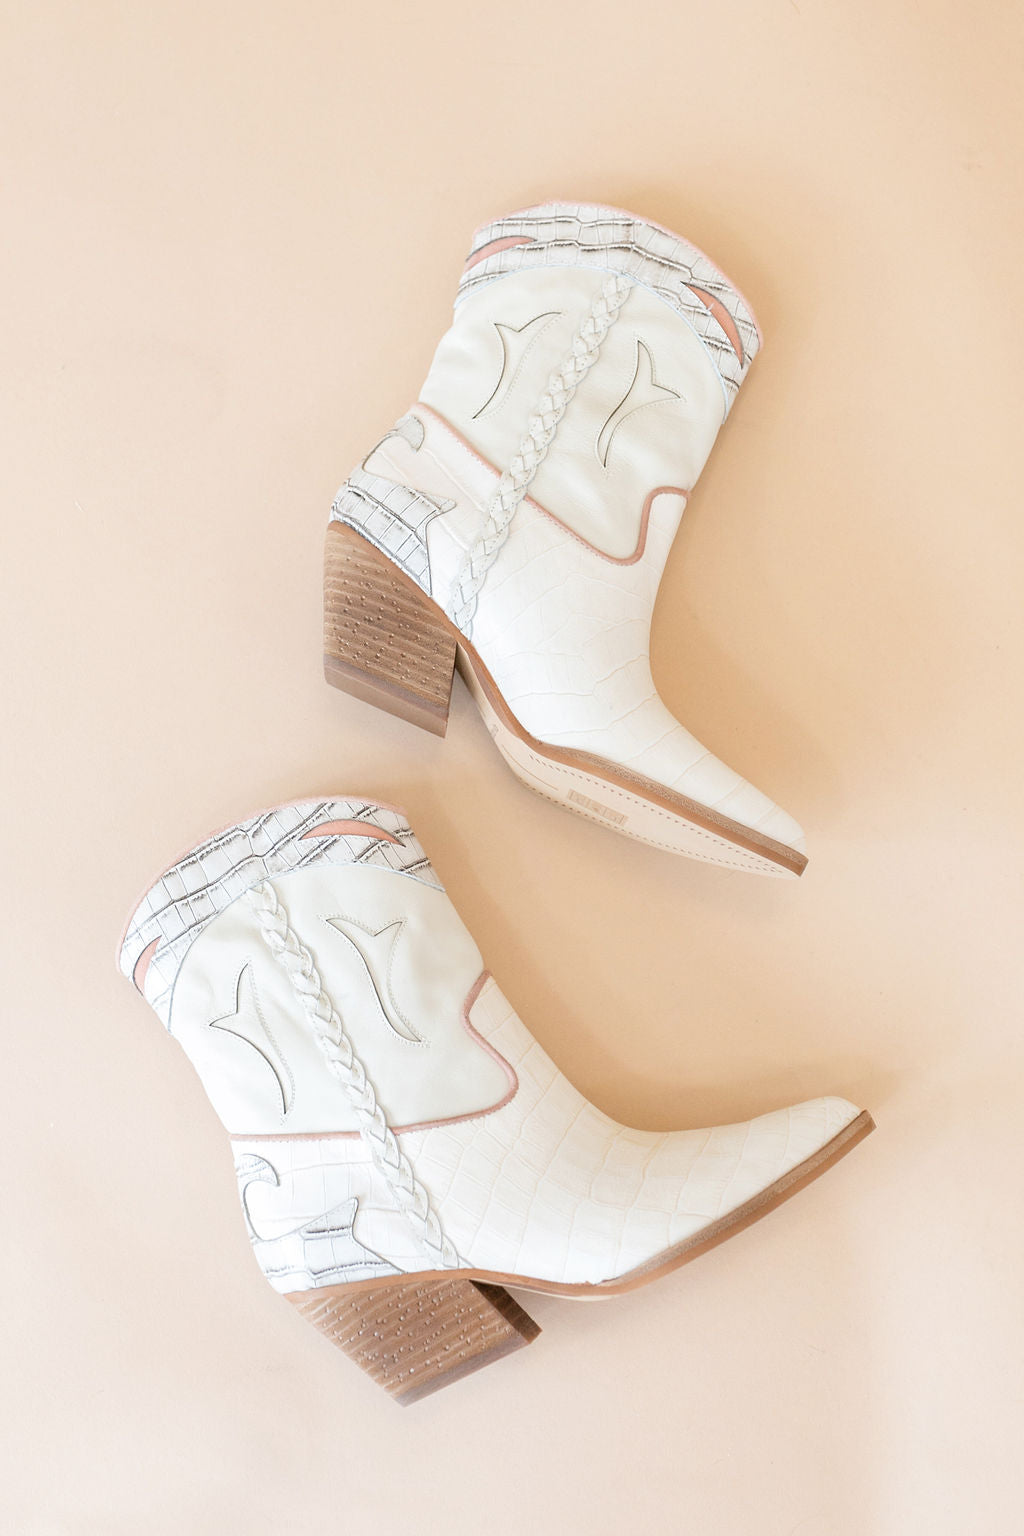 Dolce Vita | Loral Western Booties | Ivory Croc Print Leather